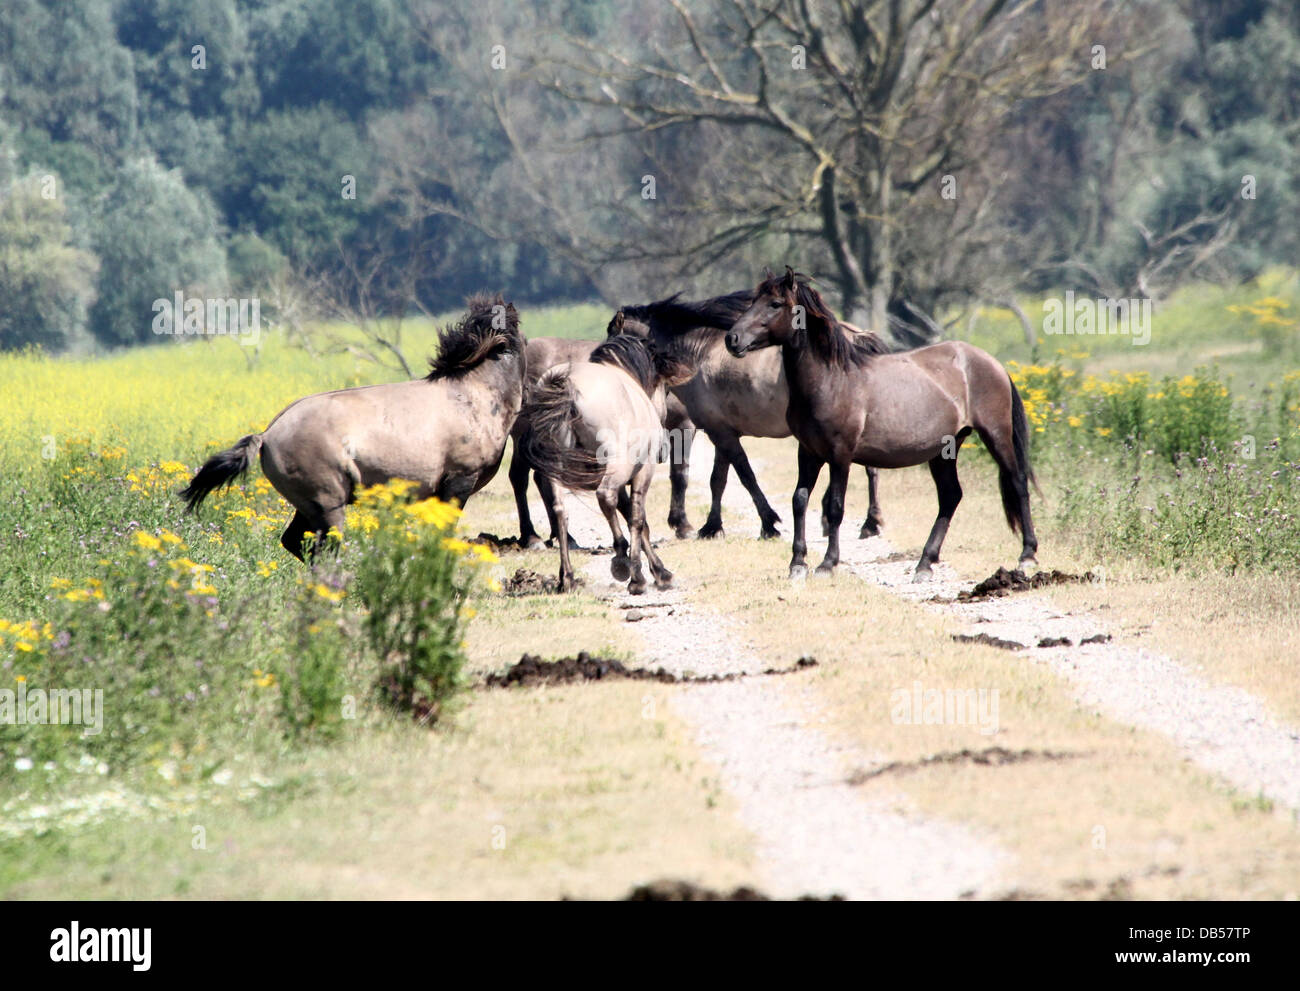 Large herd of Polish primitive horses a.k.a. Konik Horses fighting, running, mating and posing up close Stock Photo